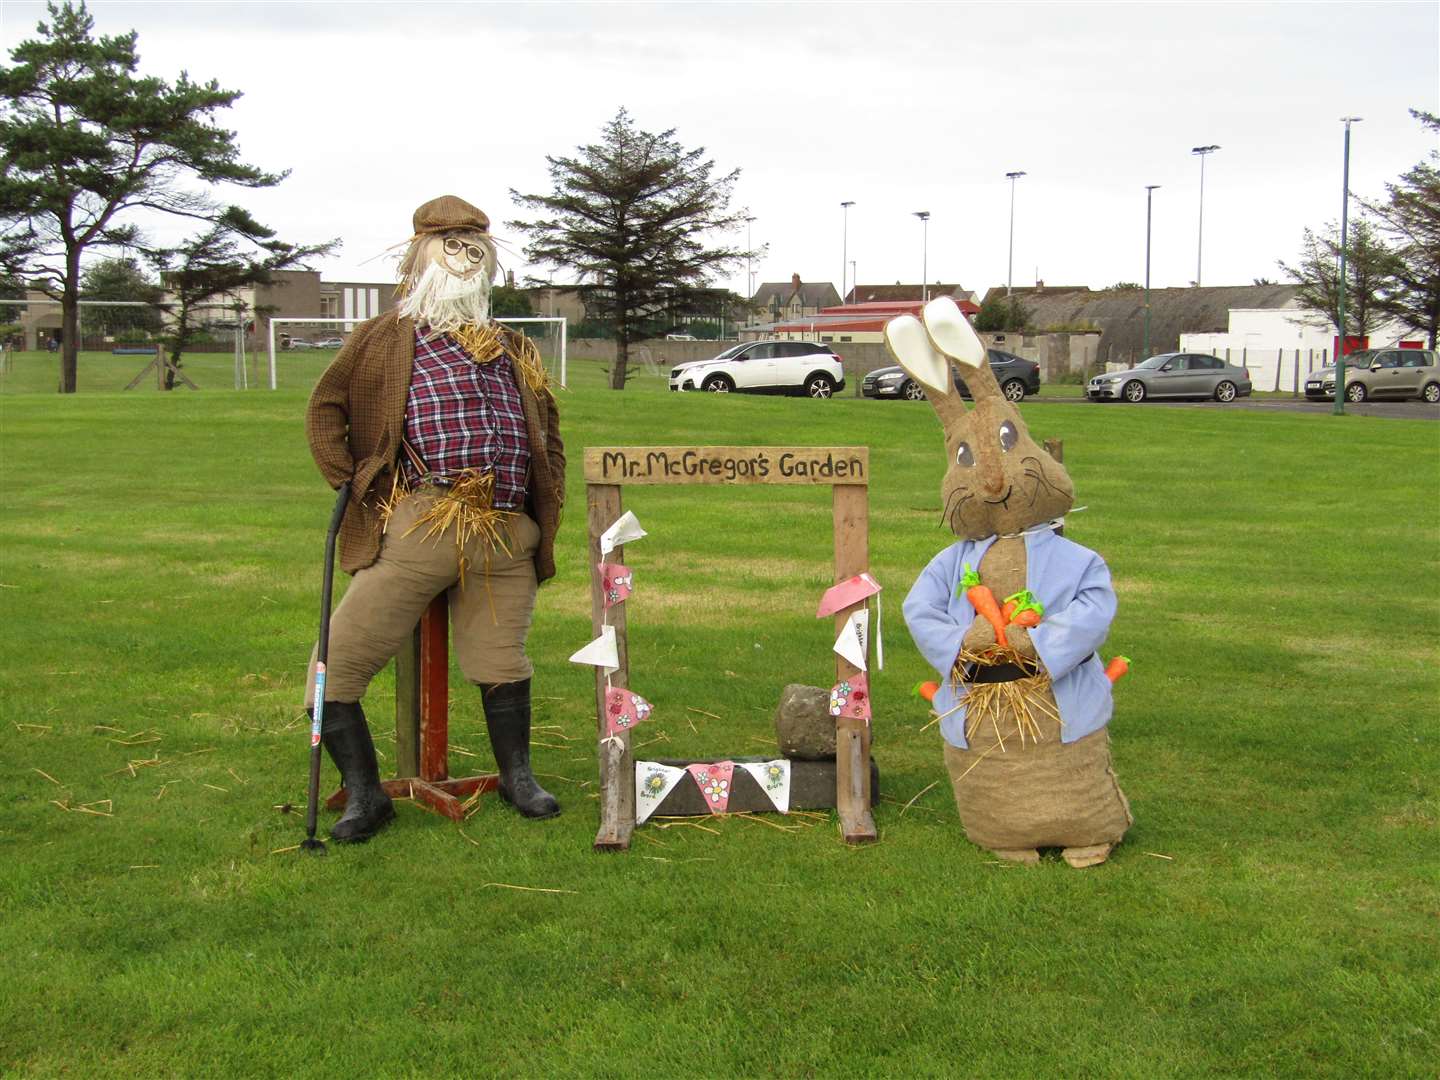 The overall winner of Brora Scarecrow Festival 2019 was Peter Rabbit and Mr McGregor's Garden by floral group Brighter Brora.